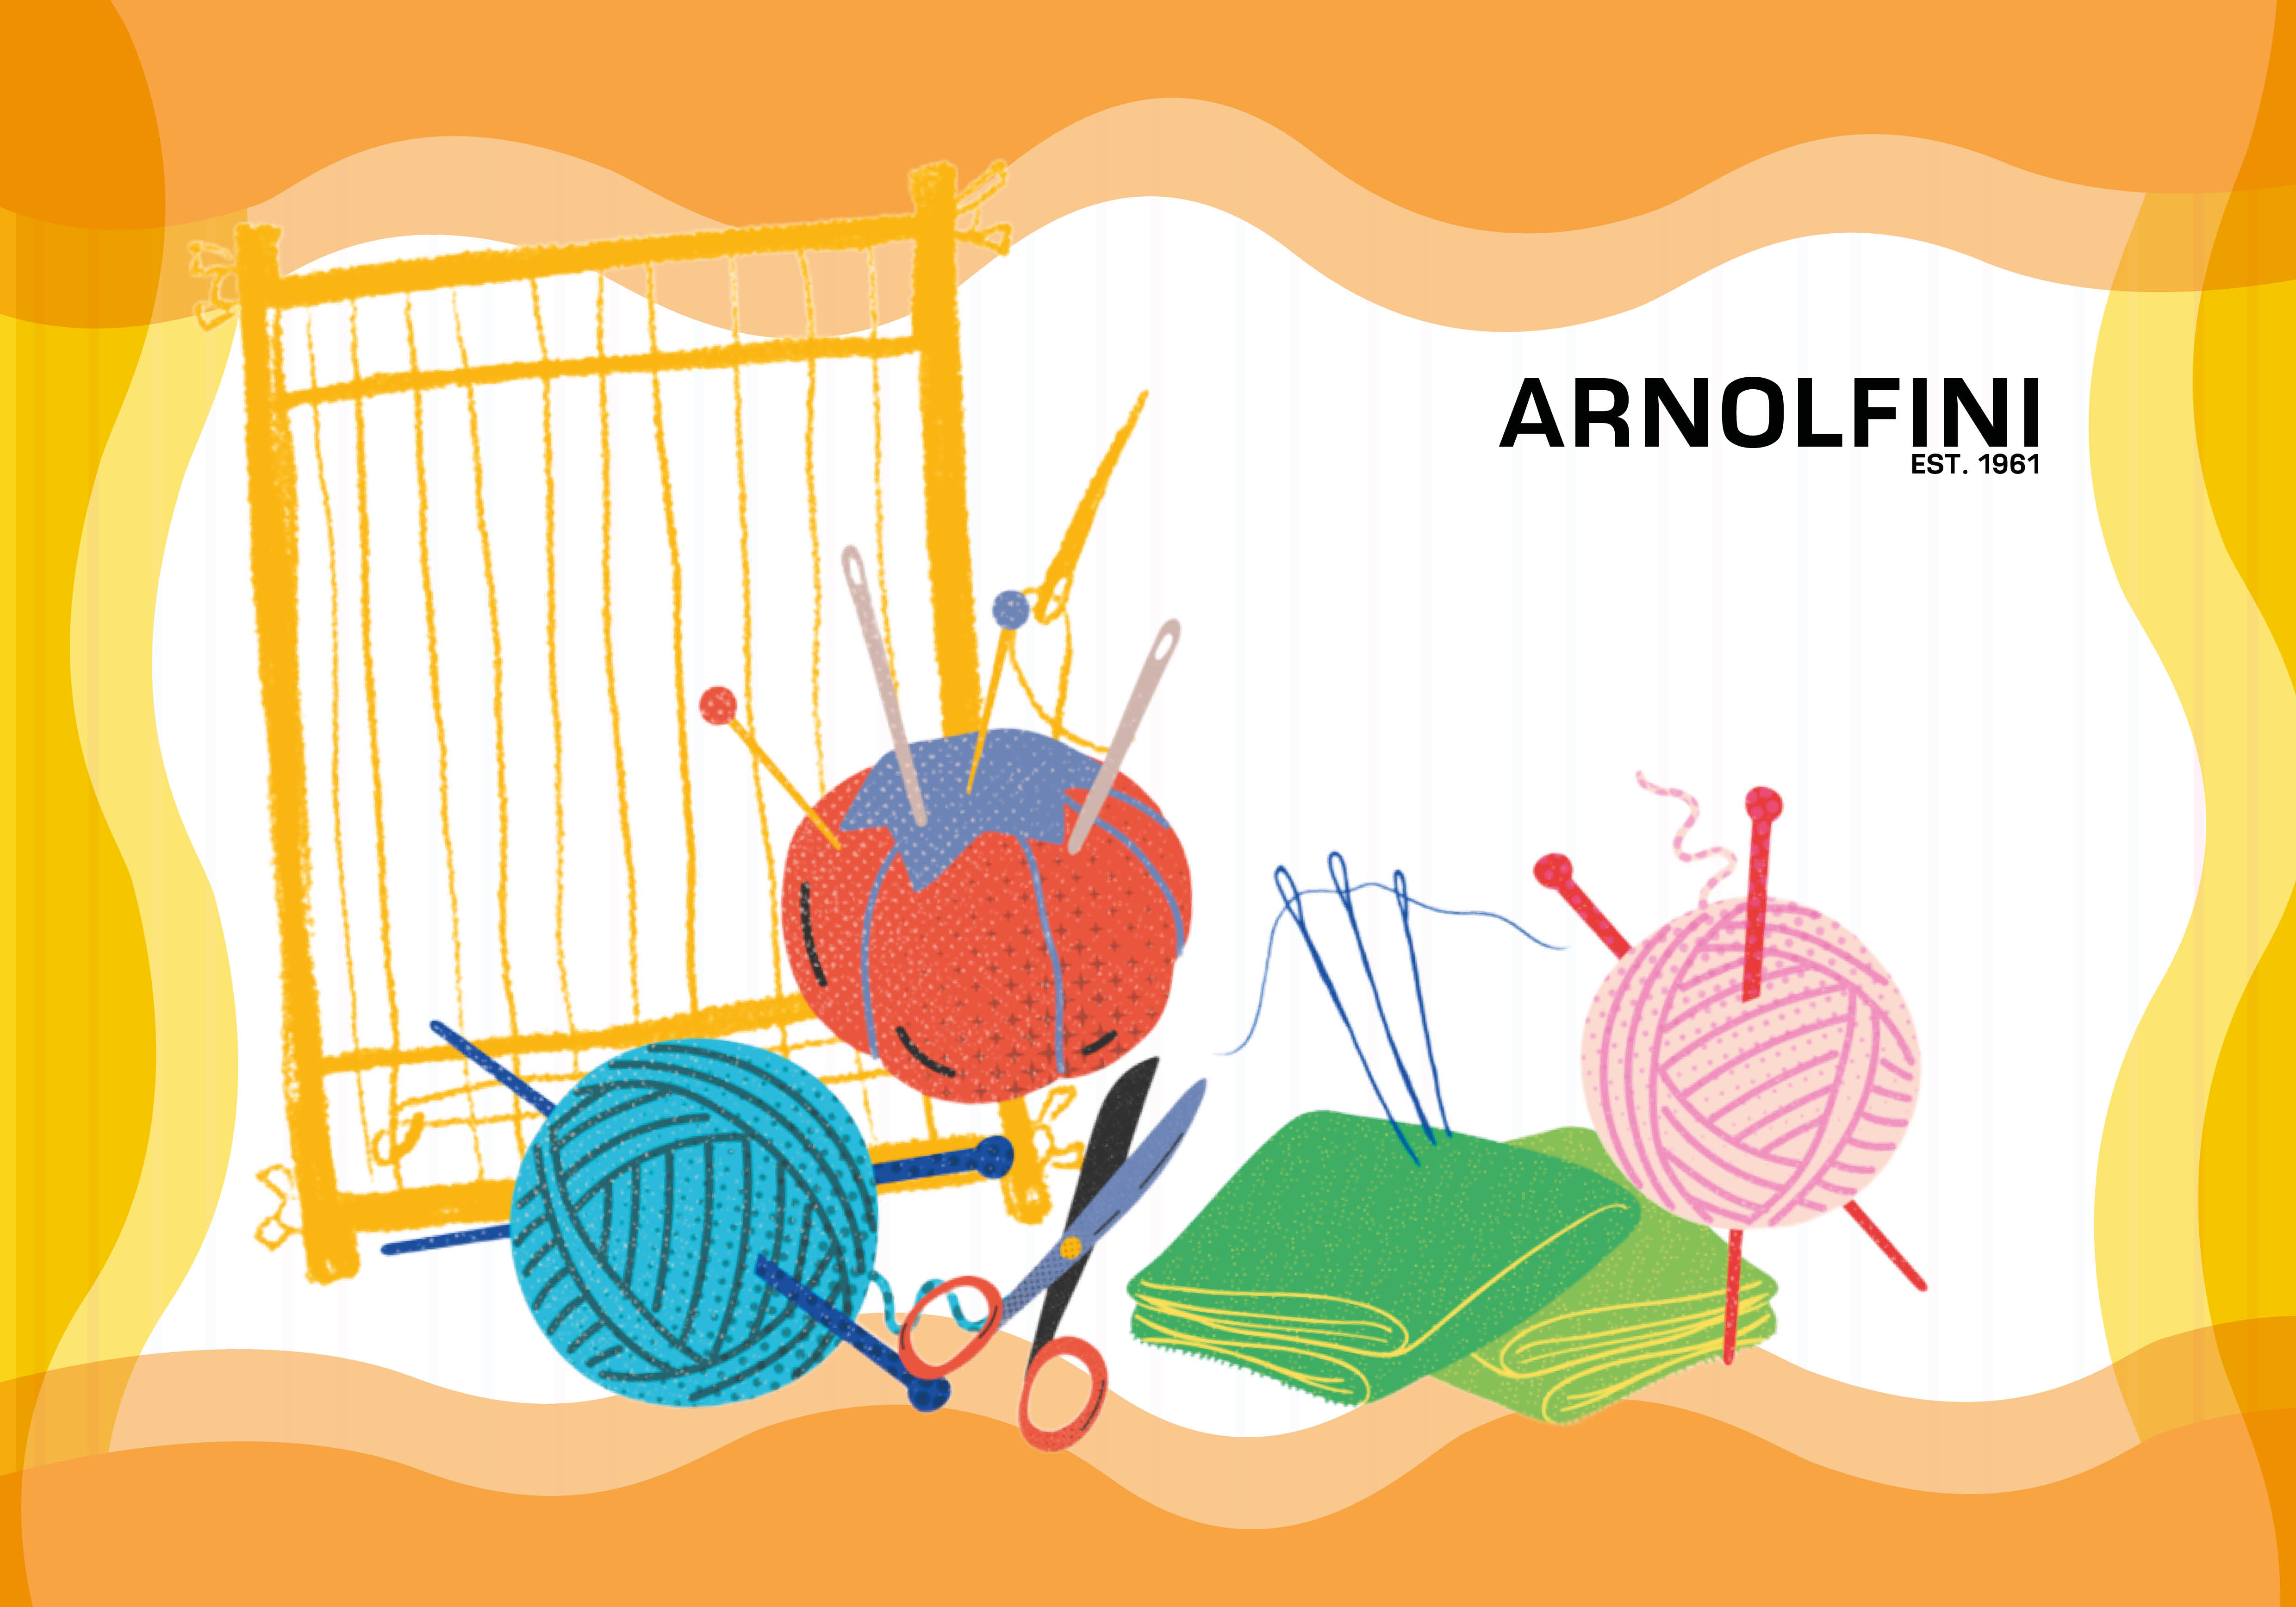 Illustration of a weaving loom, knitting needles and a crochet hook in a ball of yarn, needles, a pair of scissors, and cloth.